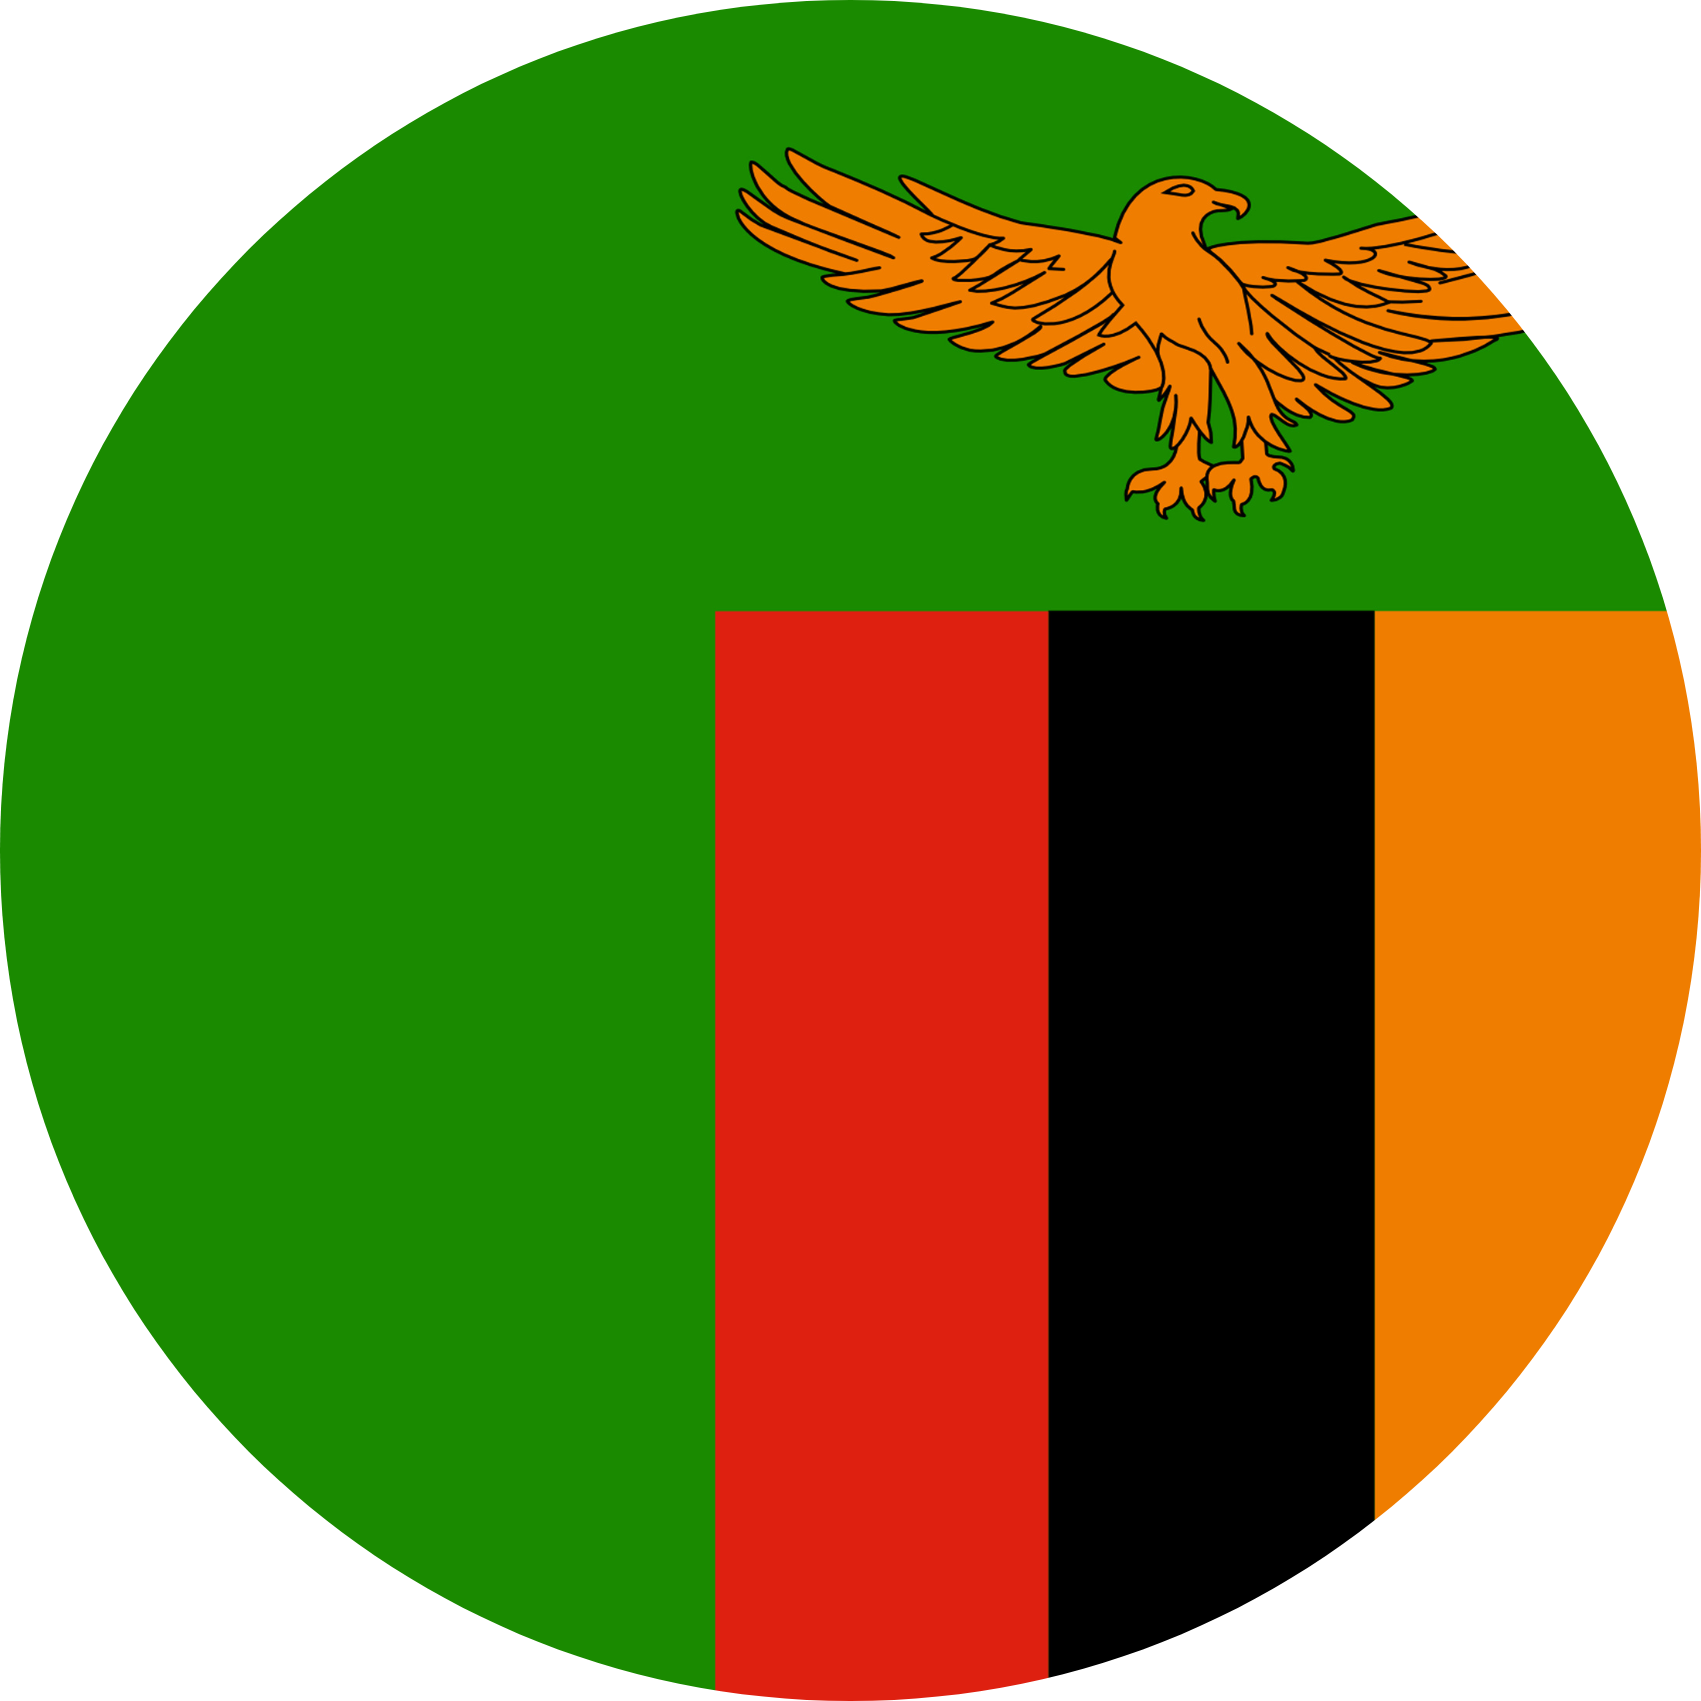 Zambia flag in a circle